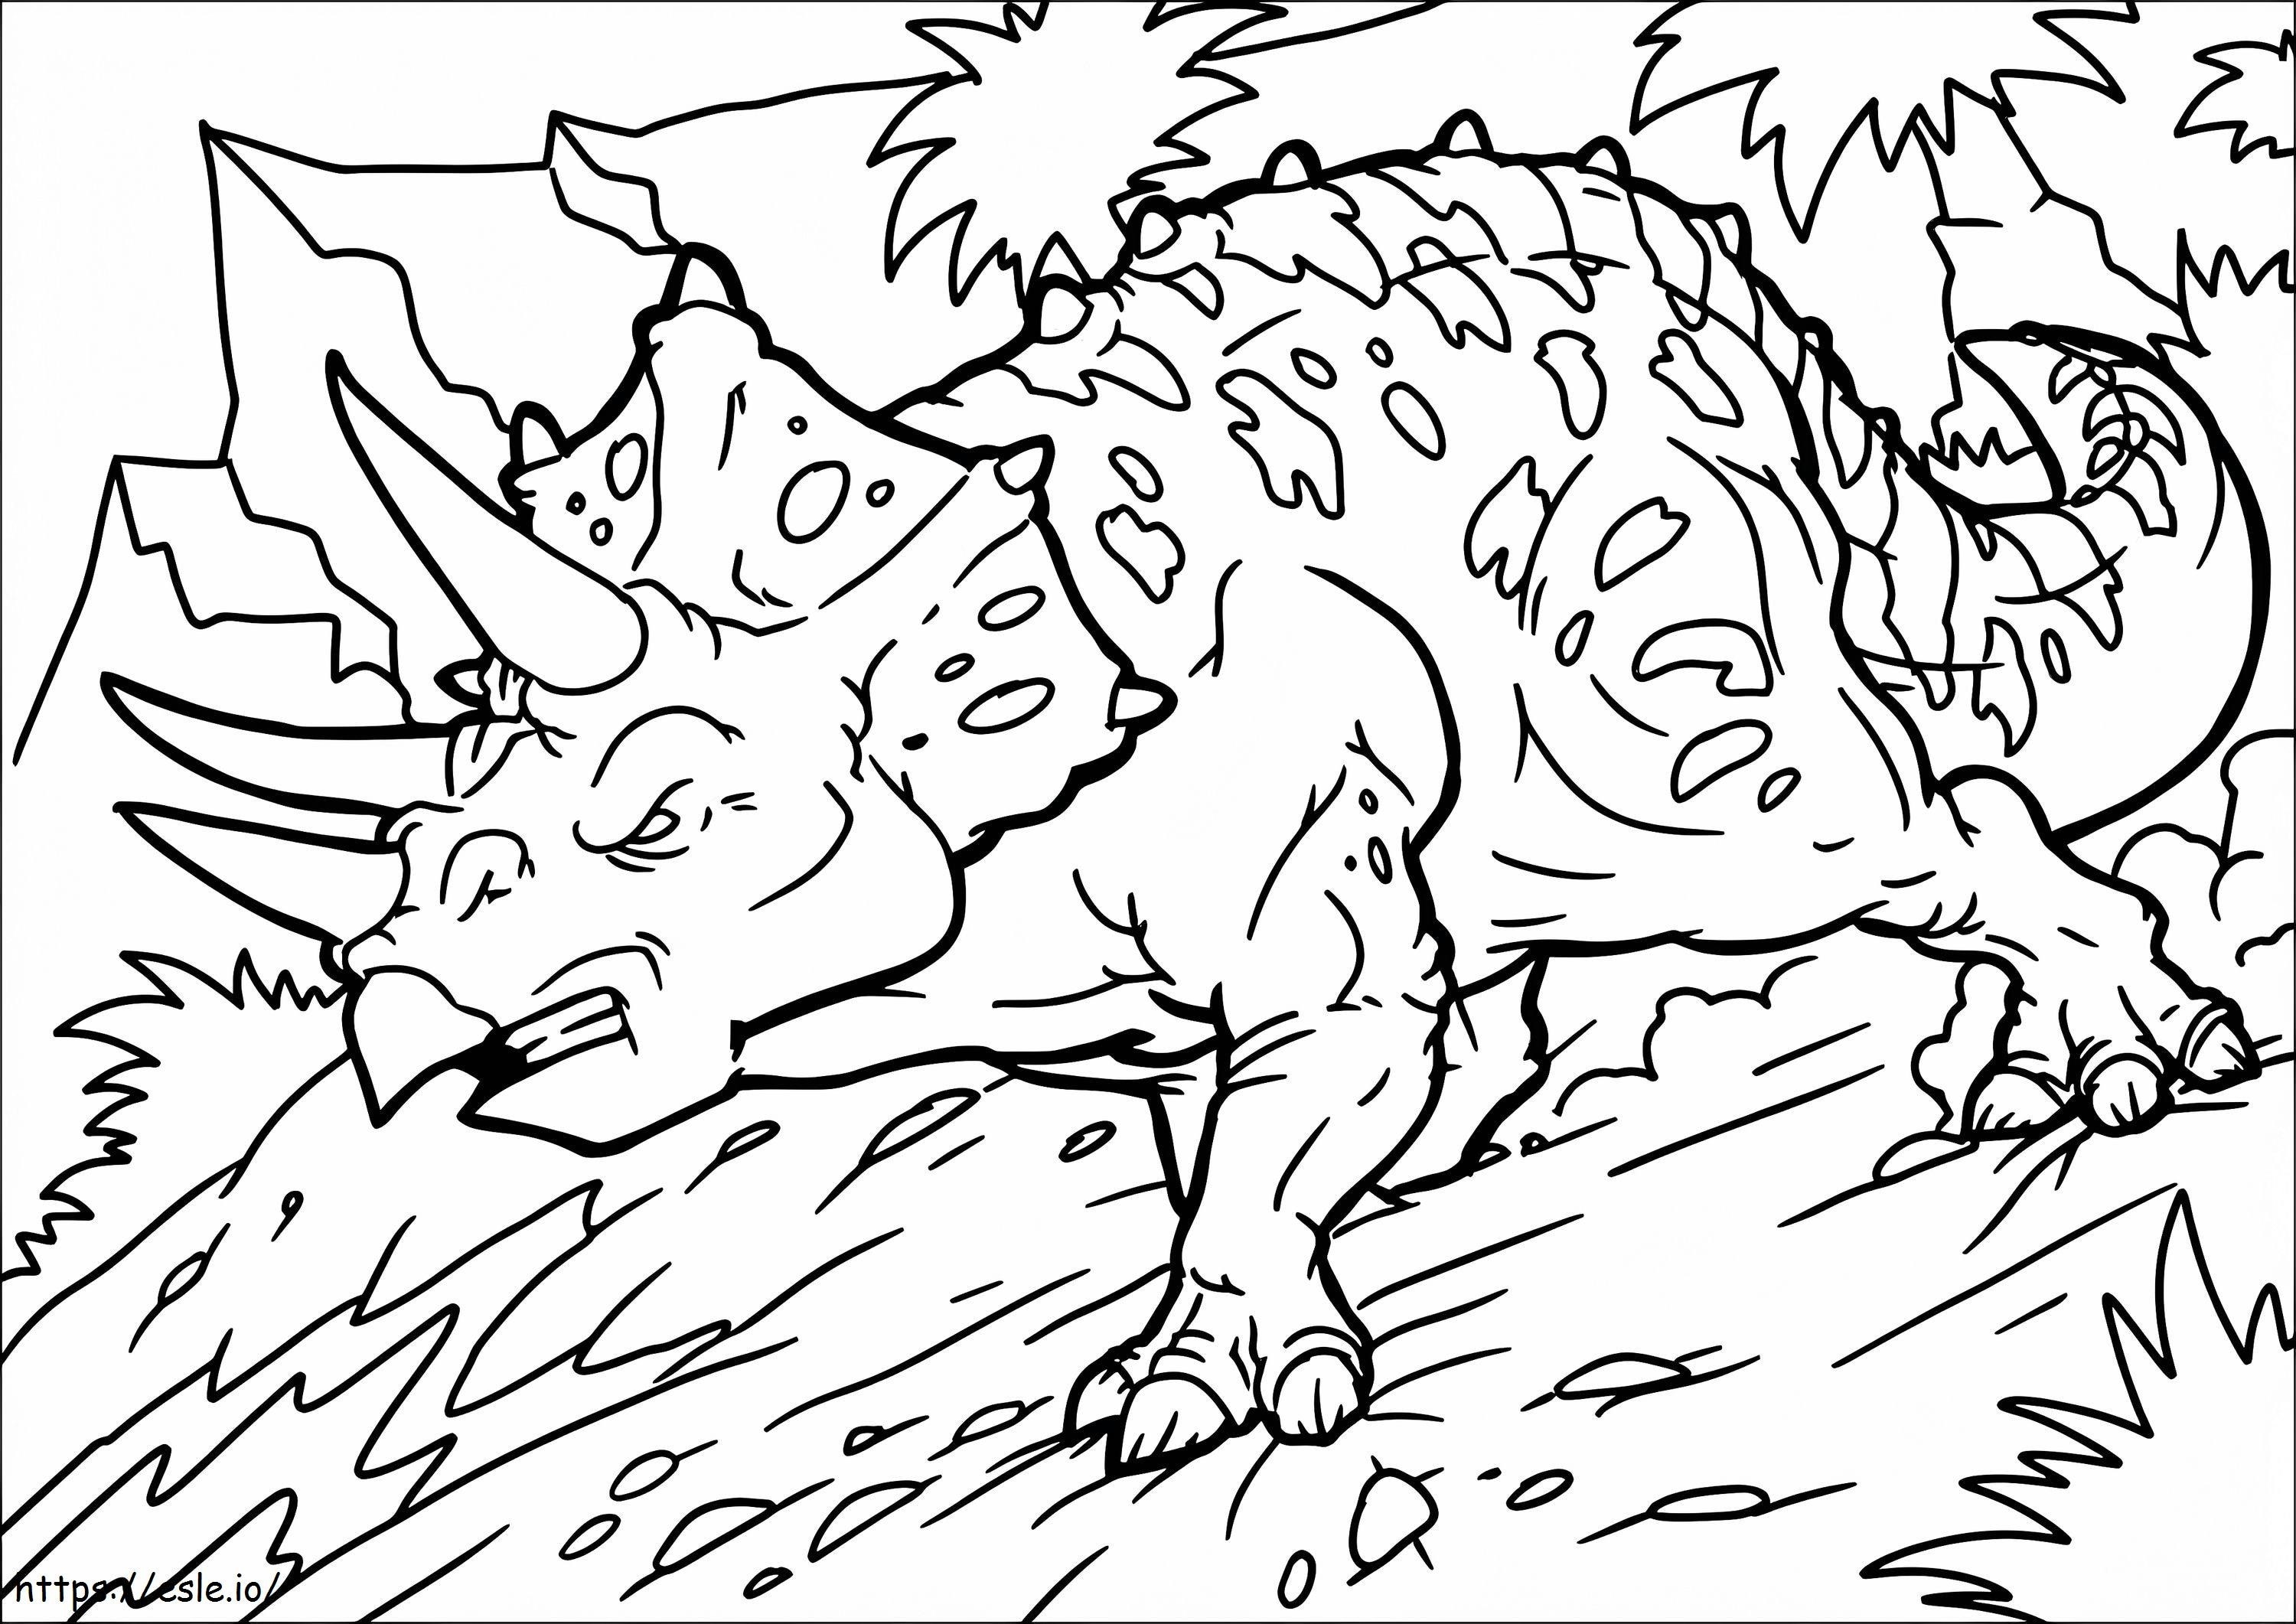 Angry Triceratops Coloring Page coloring page